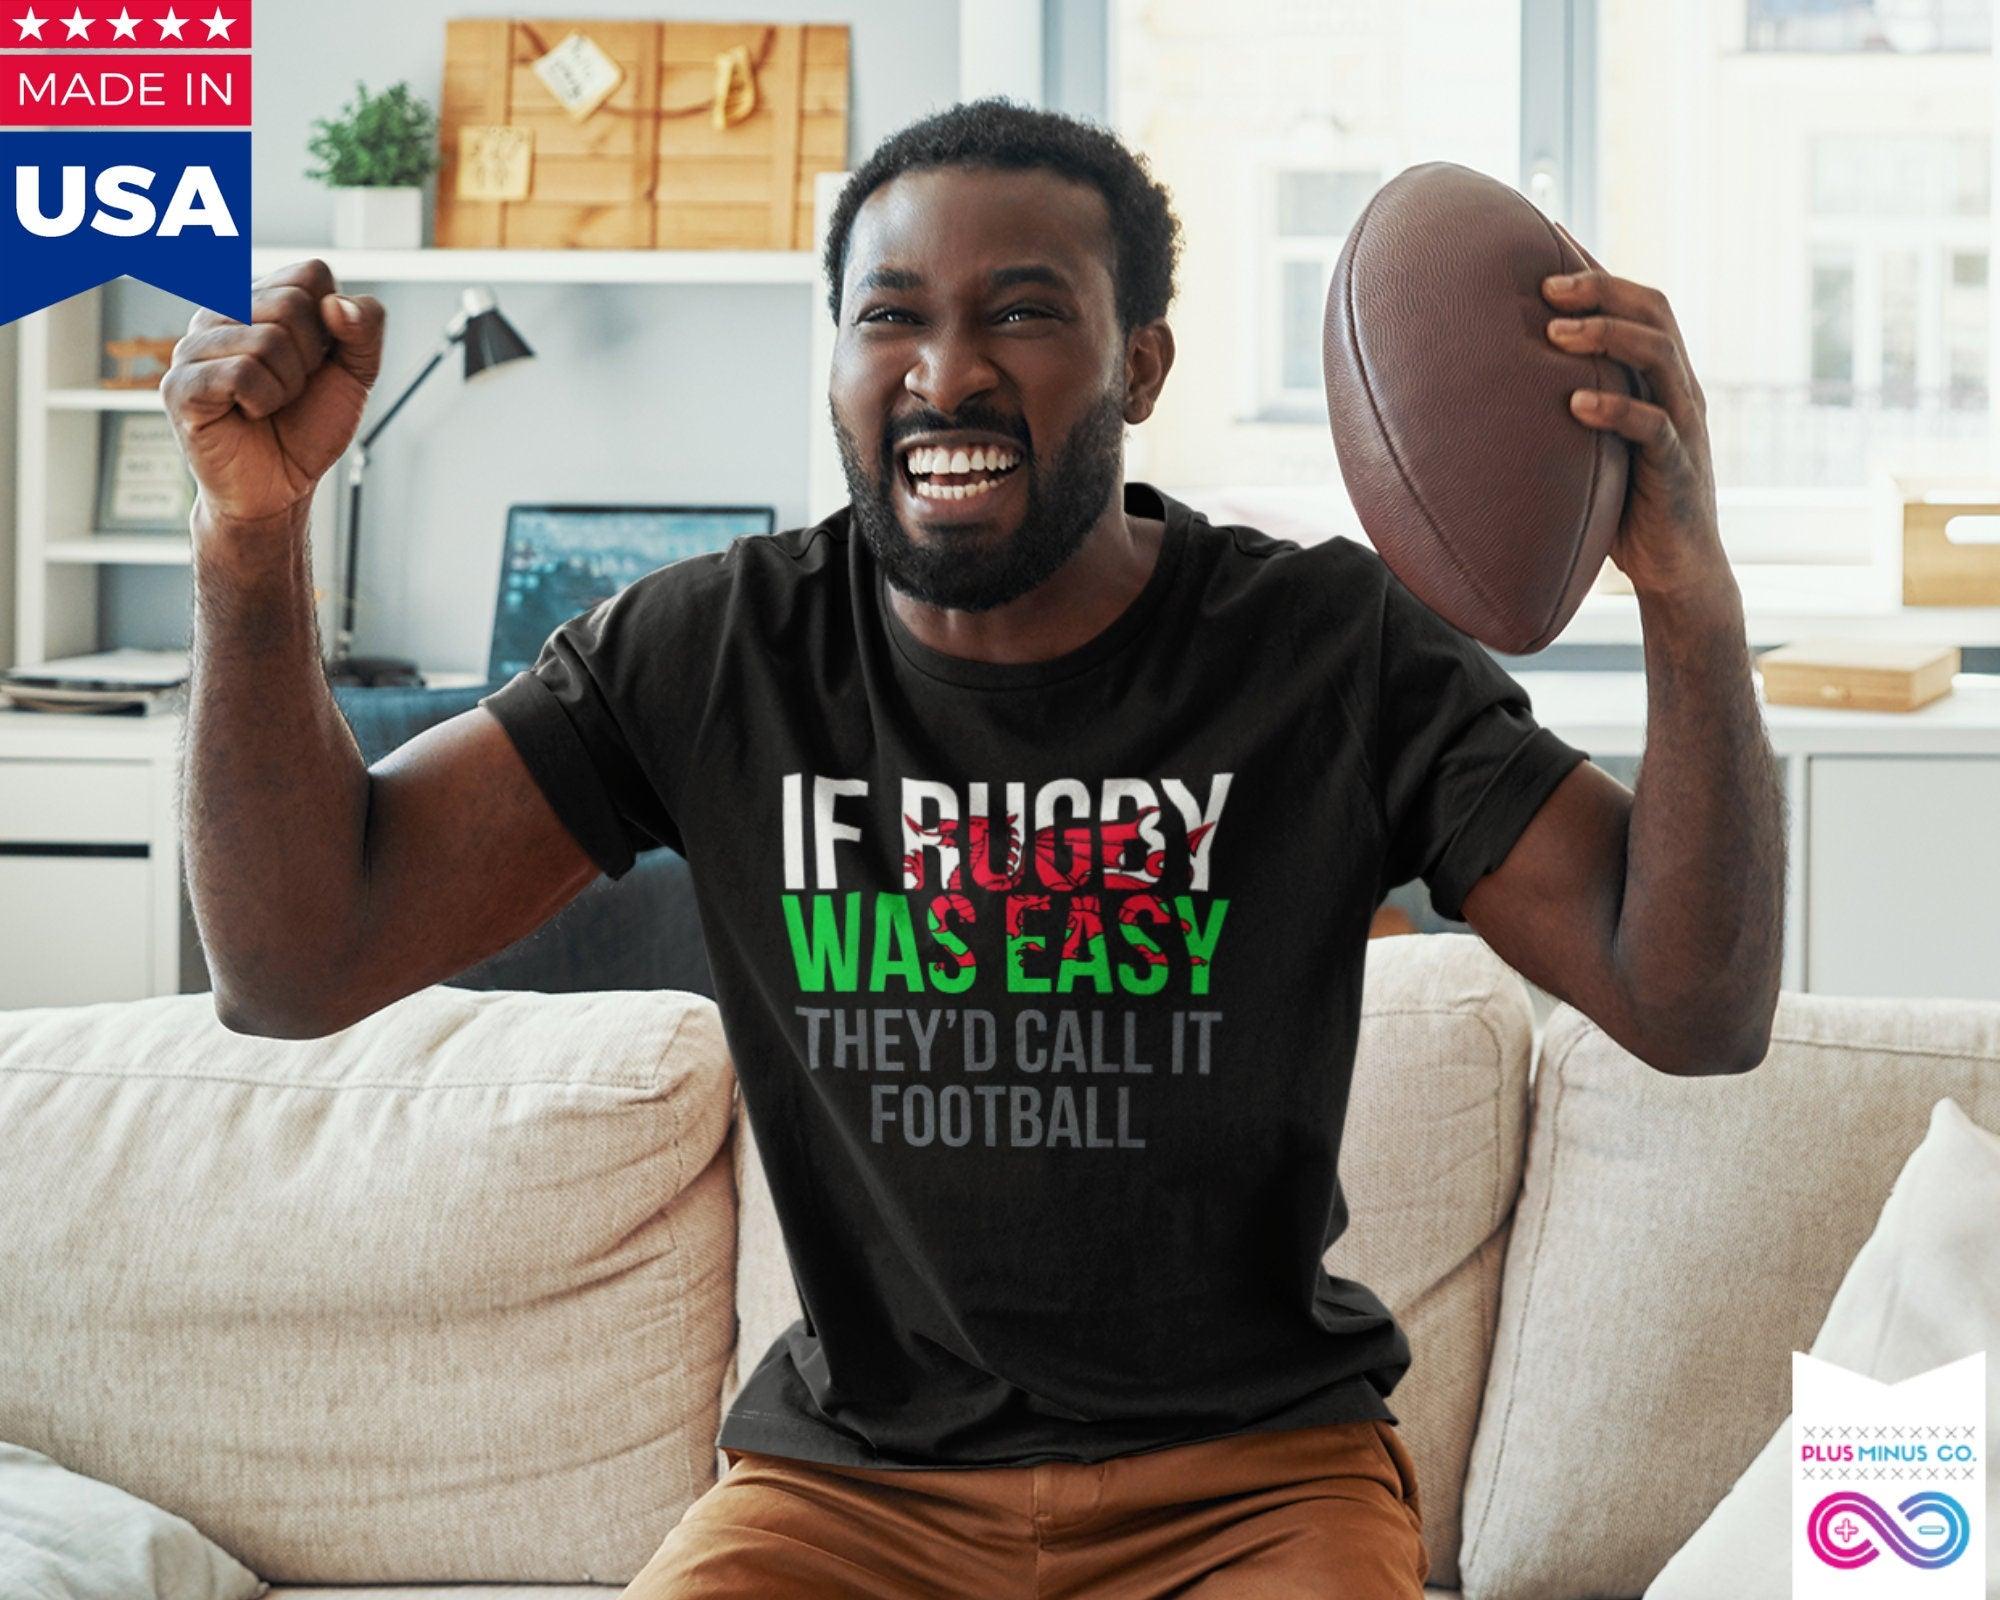 Funny Welsh Rugby - Wales Rugby T-Shirt, Rugby Fan | rugby gaver | rugbyspillertrøje | rugbyhold, rugbymor, rugbyspiller, skøre fan sjov Wales Rugby, Funny Welsh Rugby, rugbytræner, rugbymor, rugbyspiller, rugbyspillertrøje, rugbyholds t-shirt, rugby thanksgiving, T-shirt, t-shirts, UK Rugby fan, Wales fan , Wales Rugby, Wales WELSH Rugby, Wales Rugby - plusminusco.com